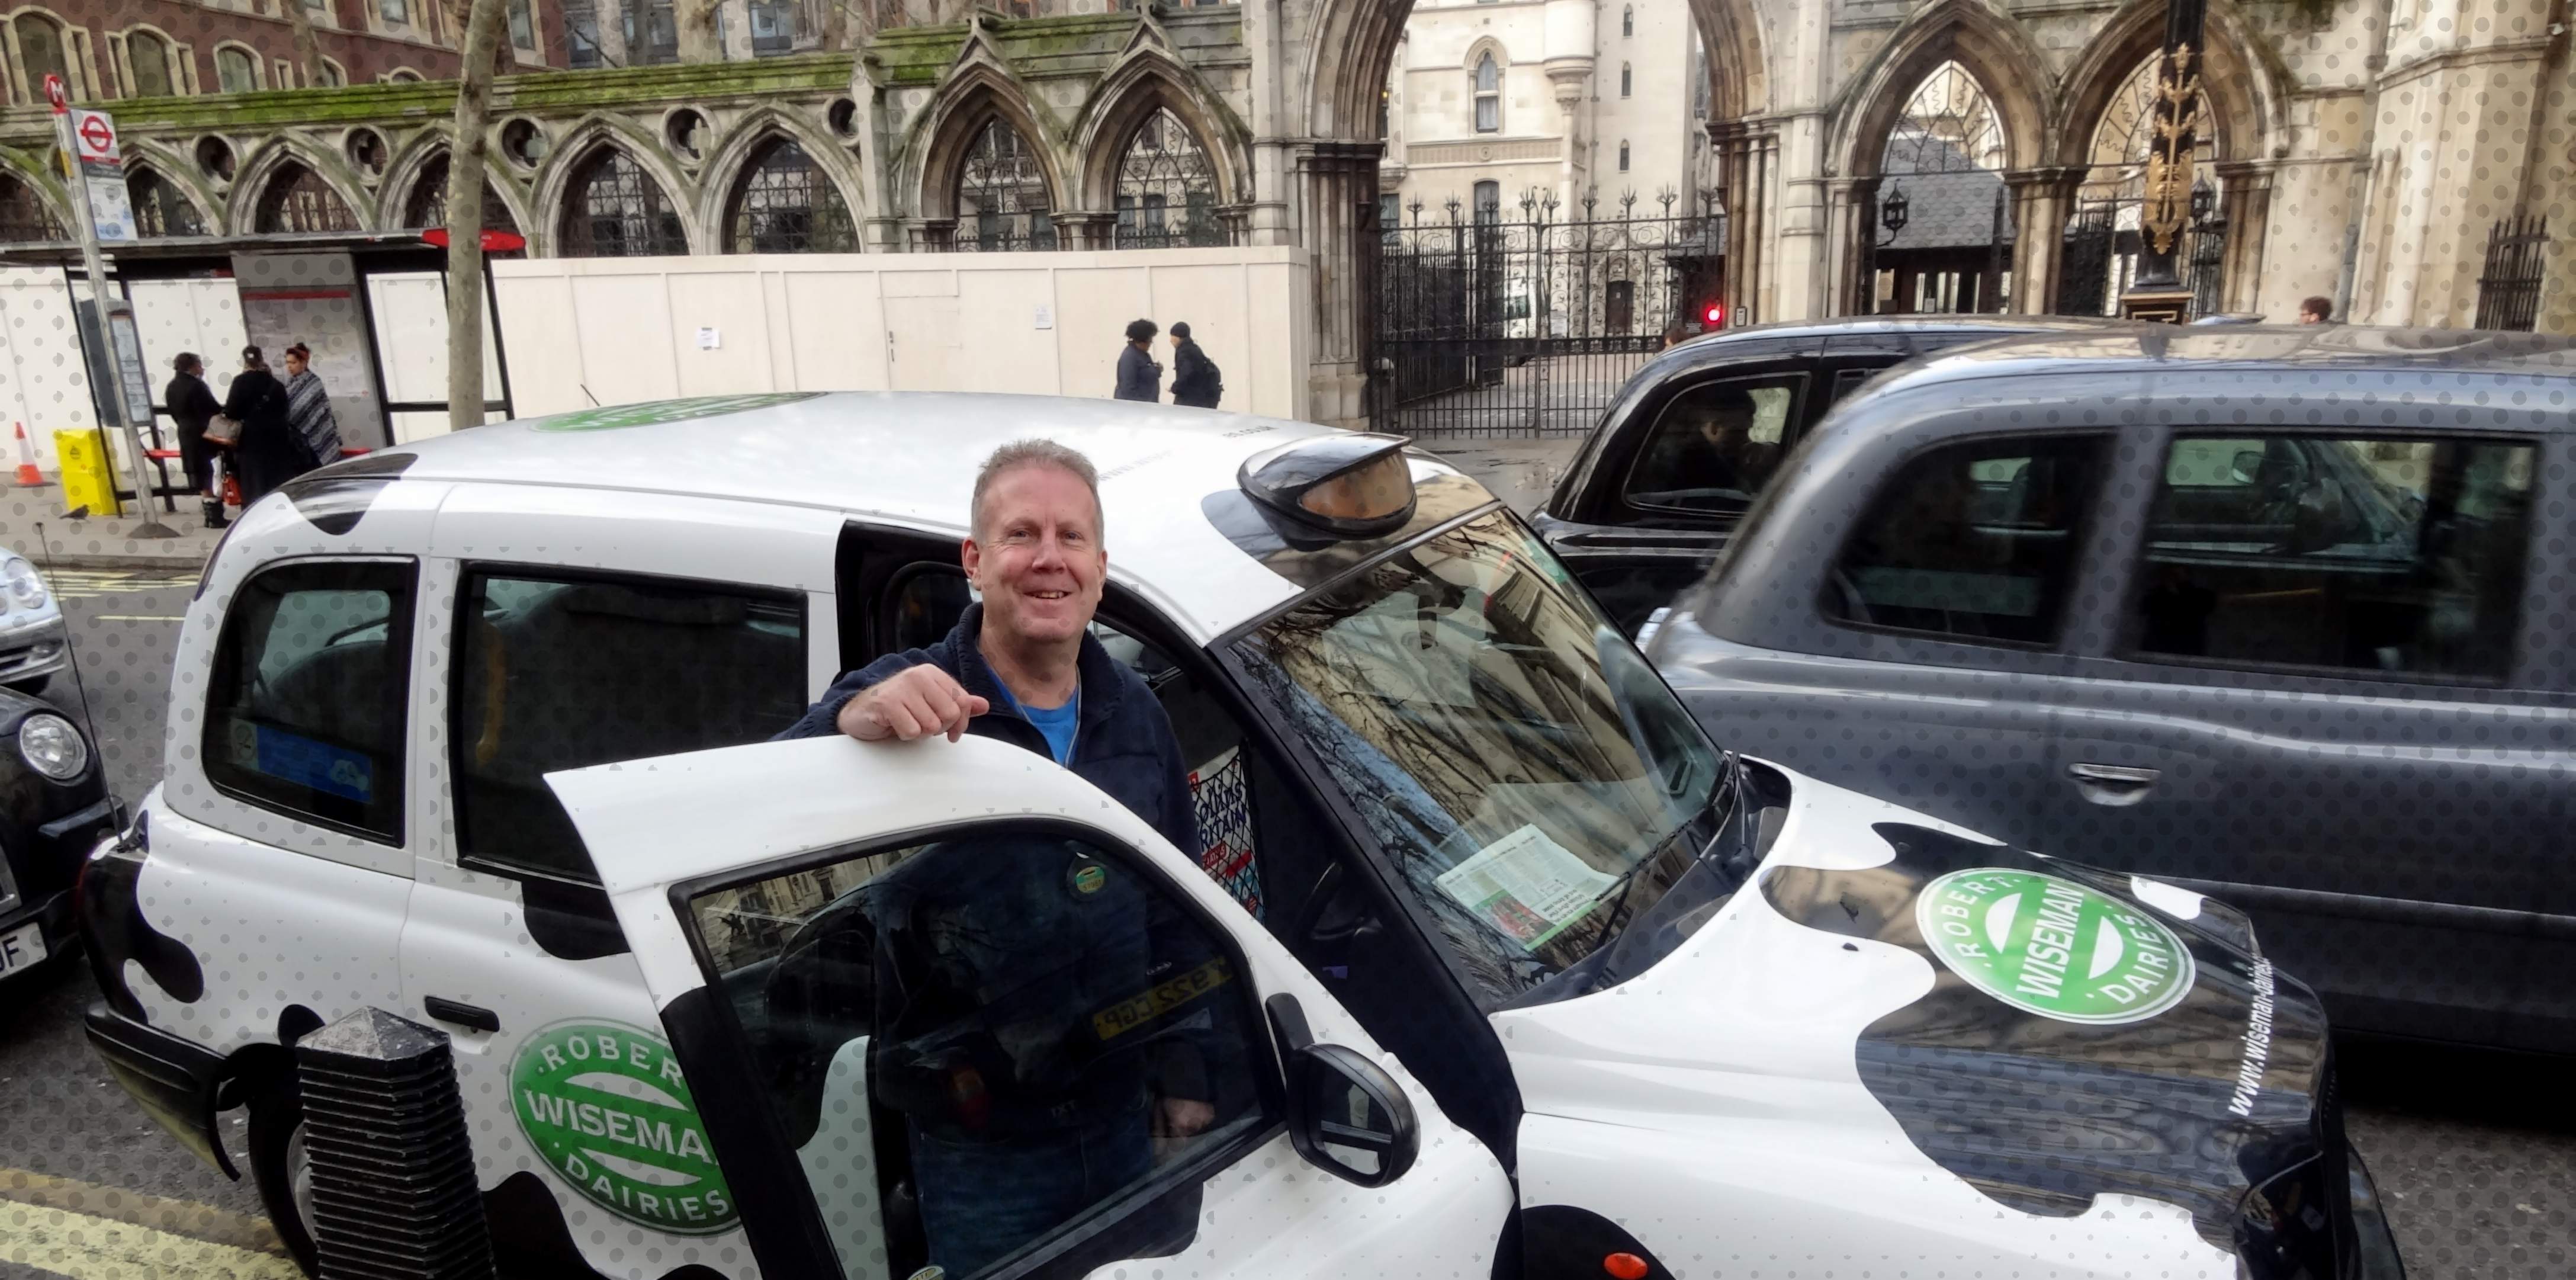 Cheap London black cab taxi tours including sites such as Buckingham Palace, Tower Bridge, Big Ben and the Houses of Parliament, The London Eye and so much more.